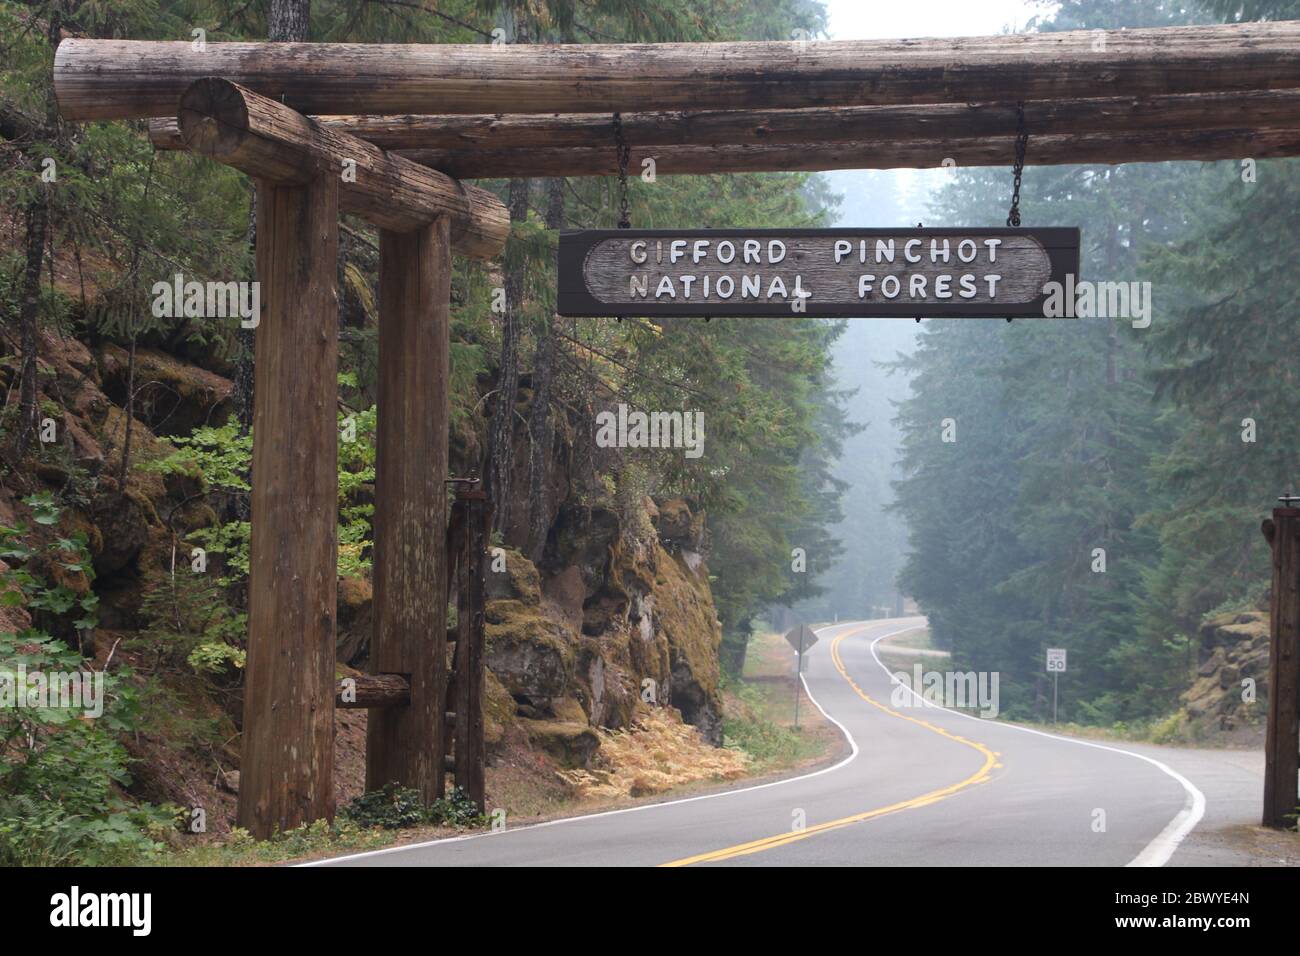 Pictured is the entry to the Gifford Pinchot National Forest in the United States. Stock Photo